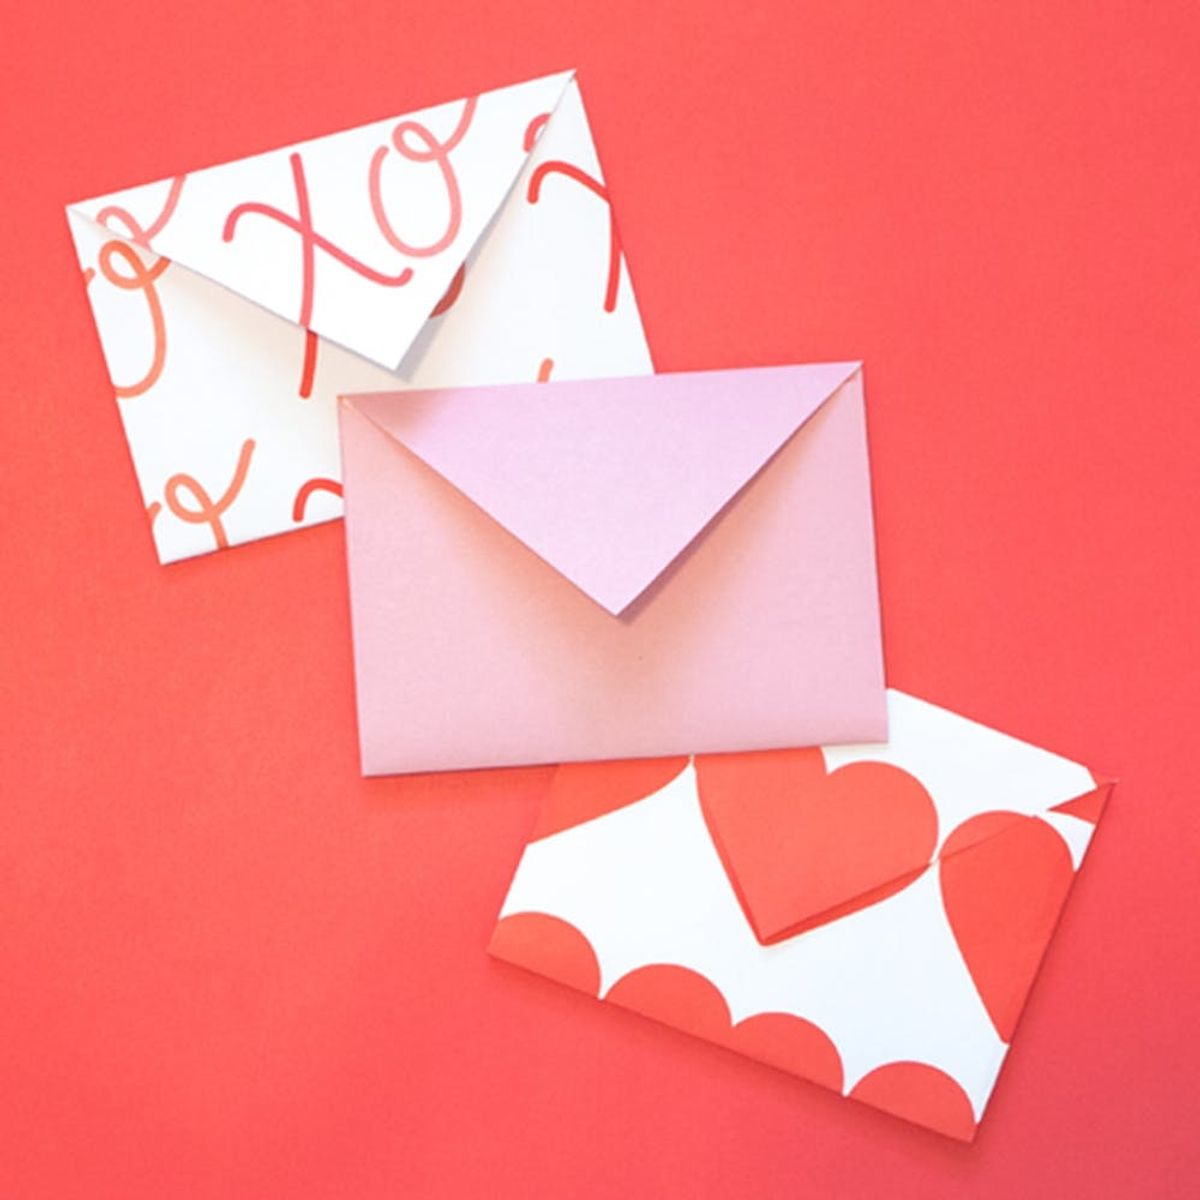 Make These Adorable Envelopes That Start as Hearts!